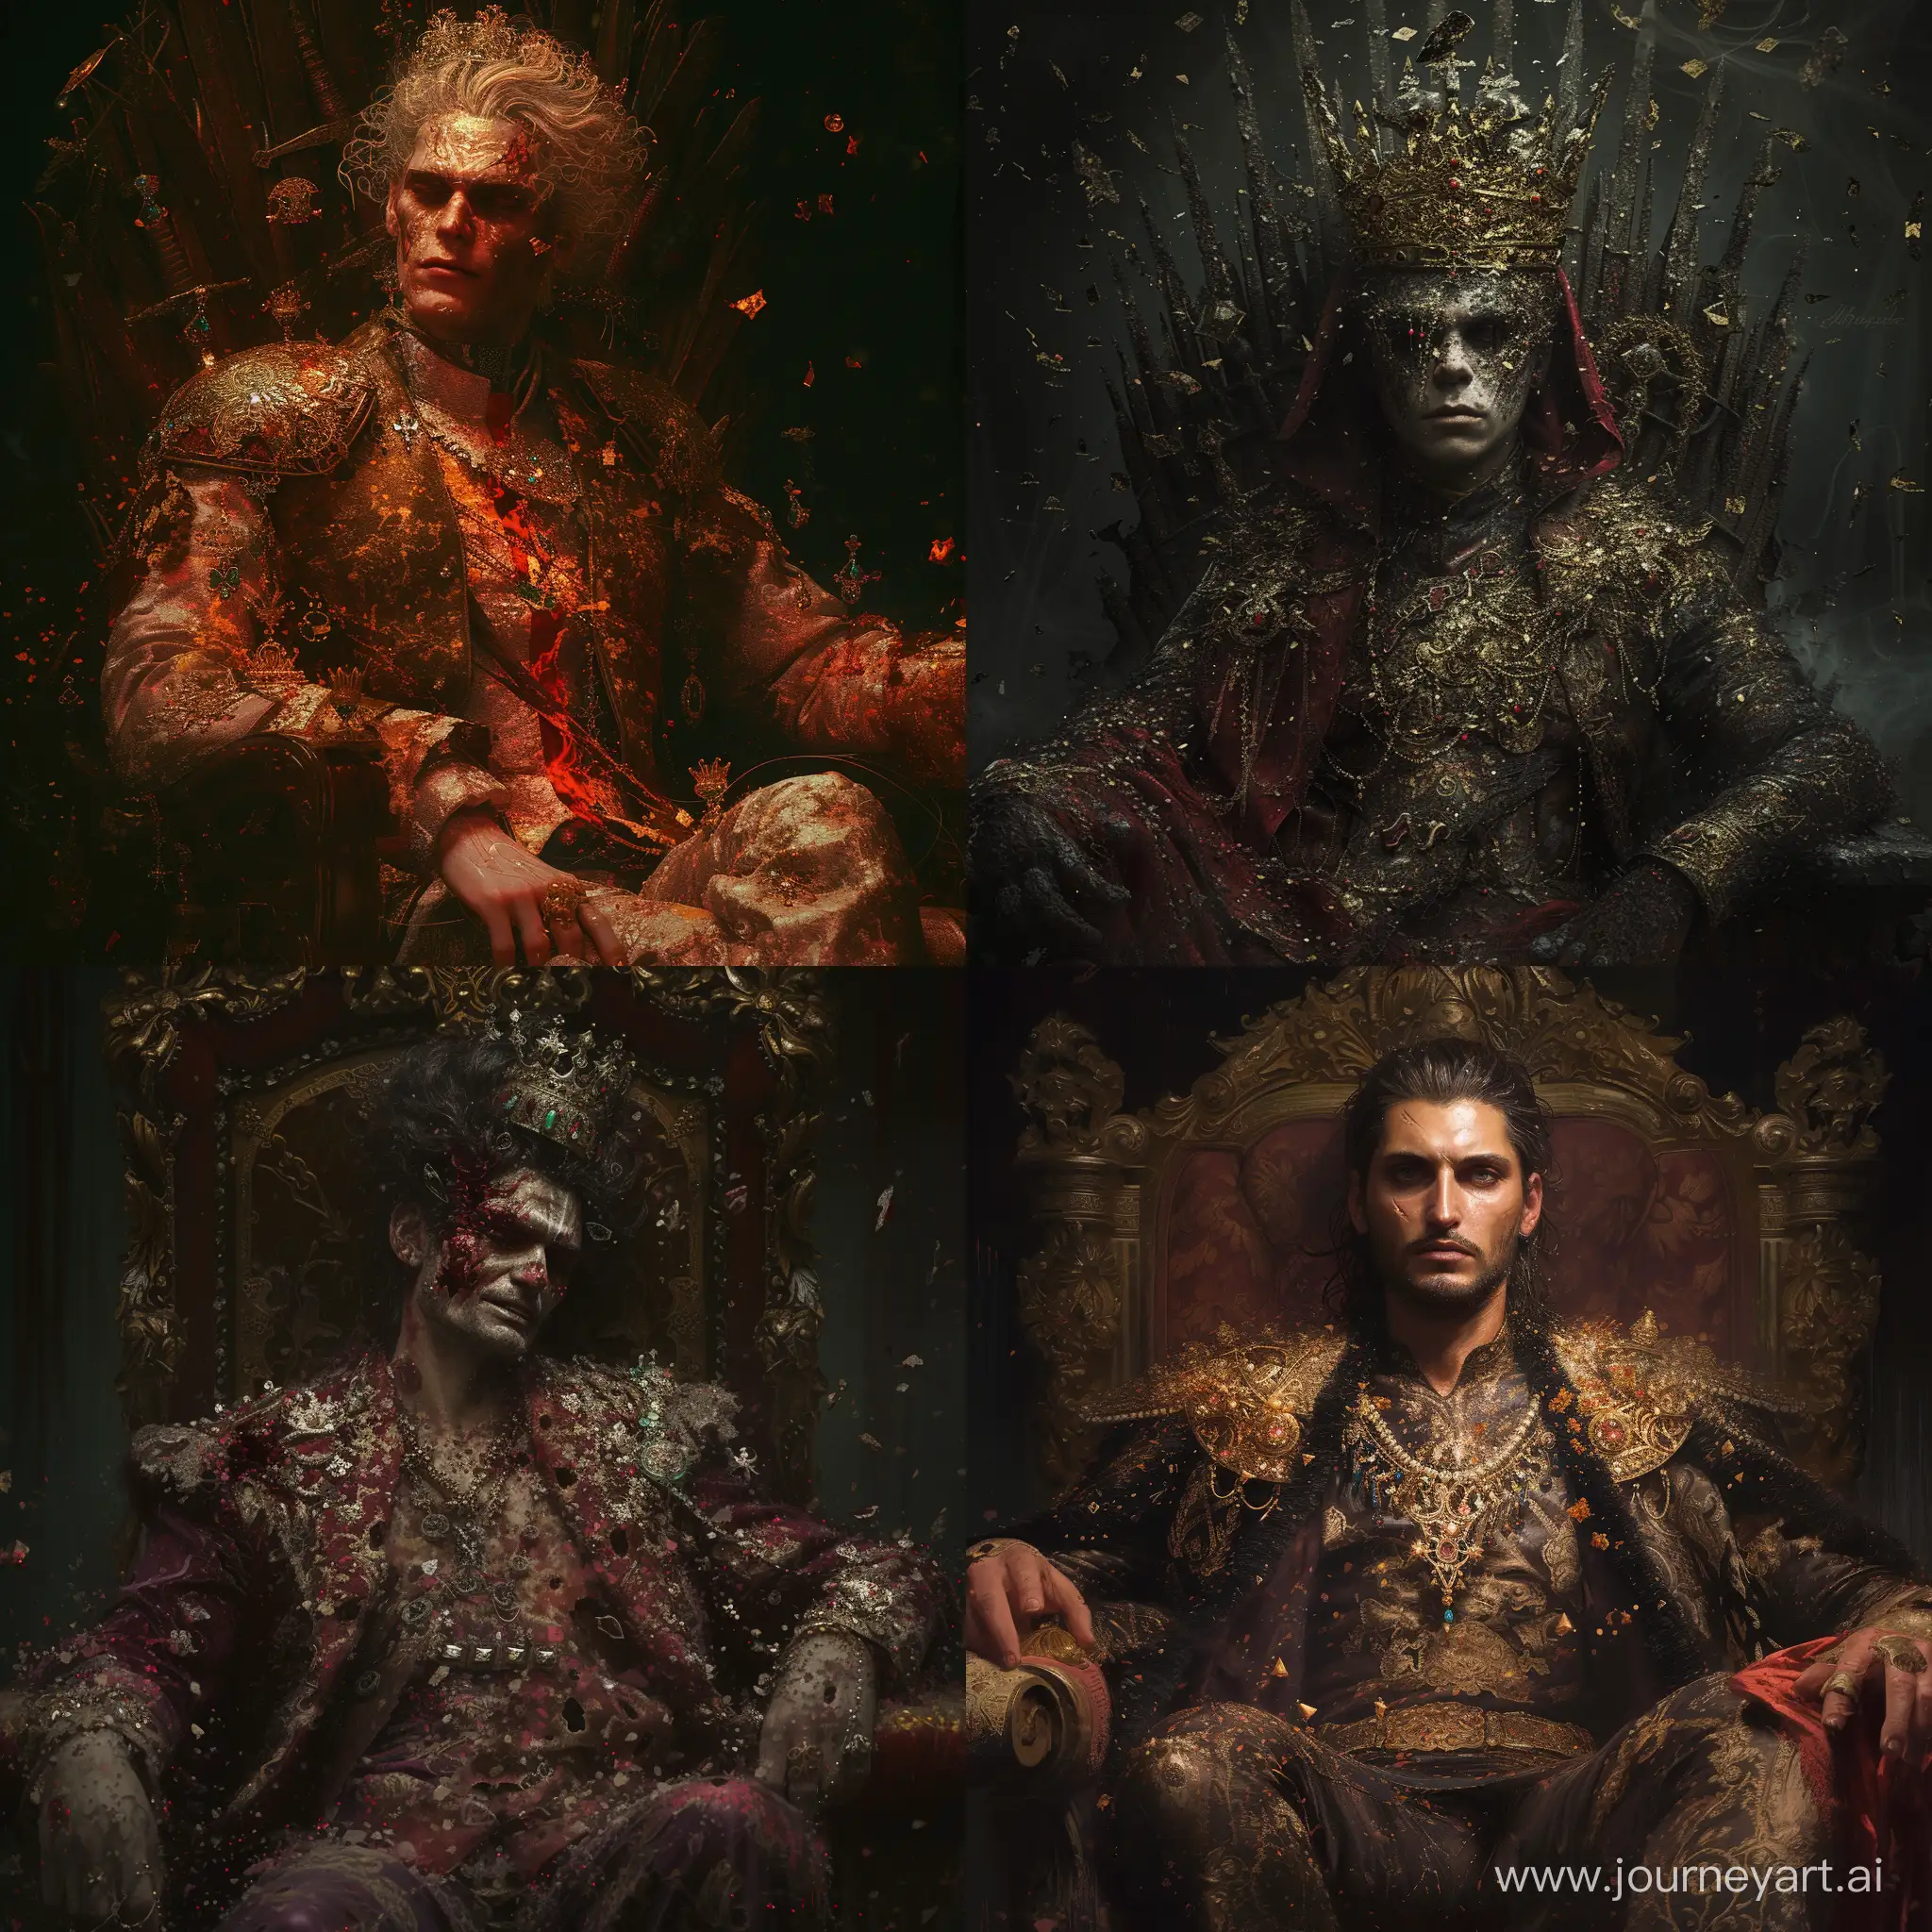 Impeccably handsome, Adorned in resplendent, regal attire adorned with fragments of shattered crowns and tarnished jewels, Seated upon a throne built from the crushed aspirations of those who dared challenge its prideful dominion, 1970's dark fantasy style, gritty, dark lighting, ultra detailed